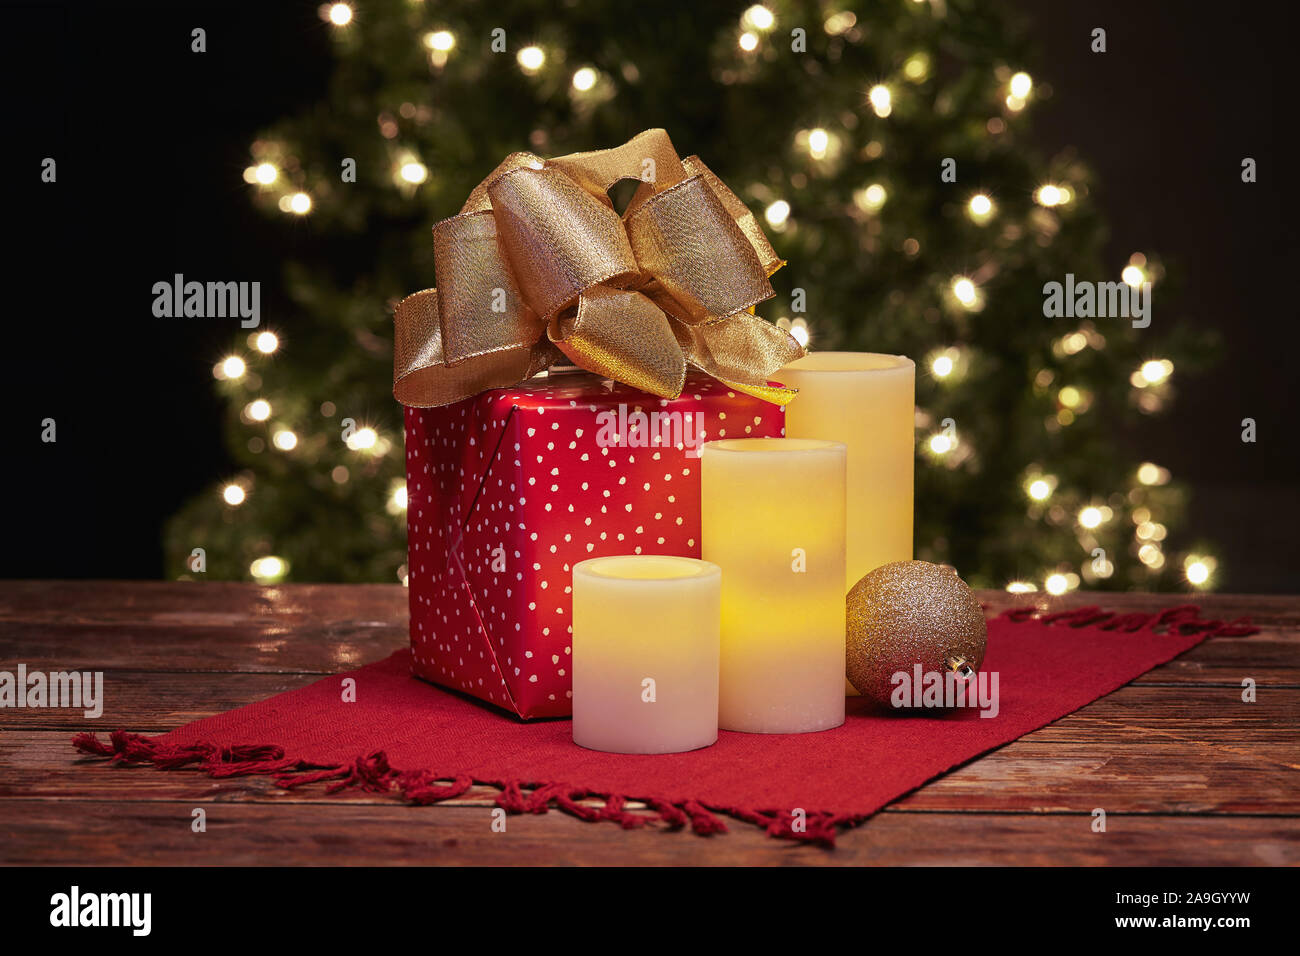 Winter holiday Christmas still life of glowing electric candles, wrapped gift and Christmas tree ornament Stock Photo